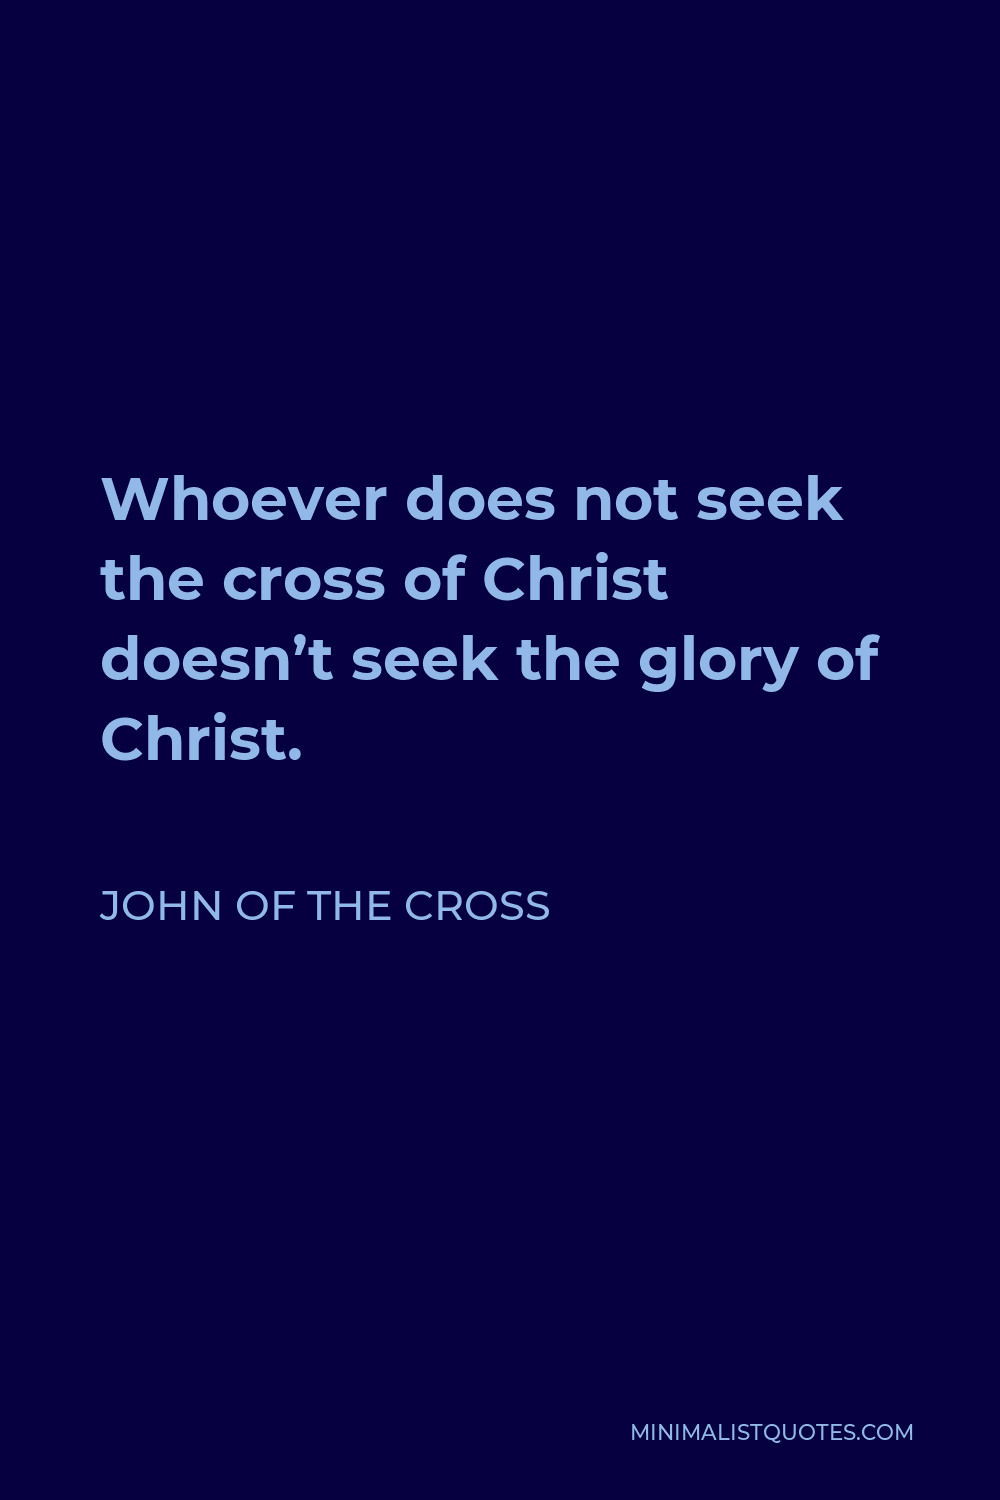 John of the Cross Quote - Whoever does not seek the cross of Christ doesn’t seek the glory of Christ.